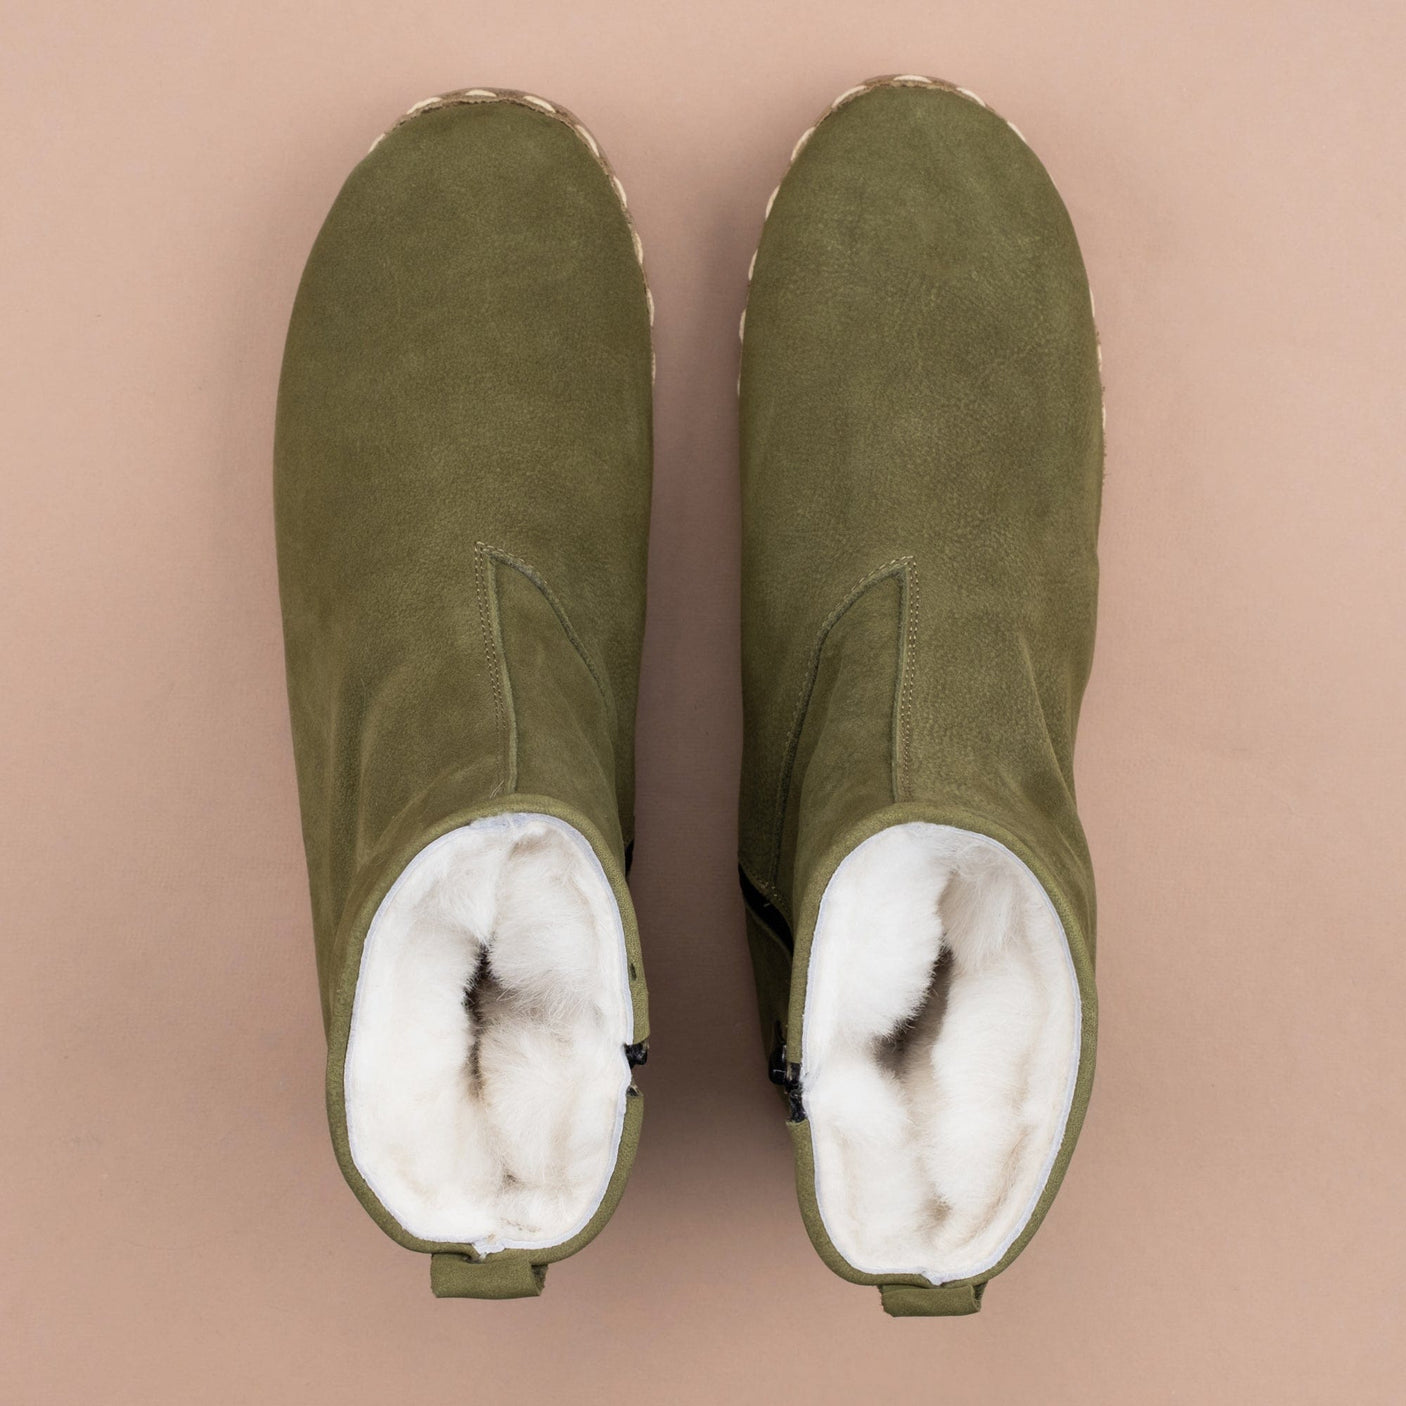 Women's Olive Shearling Boots